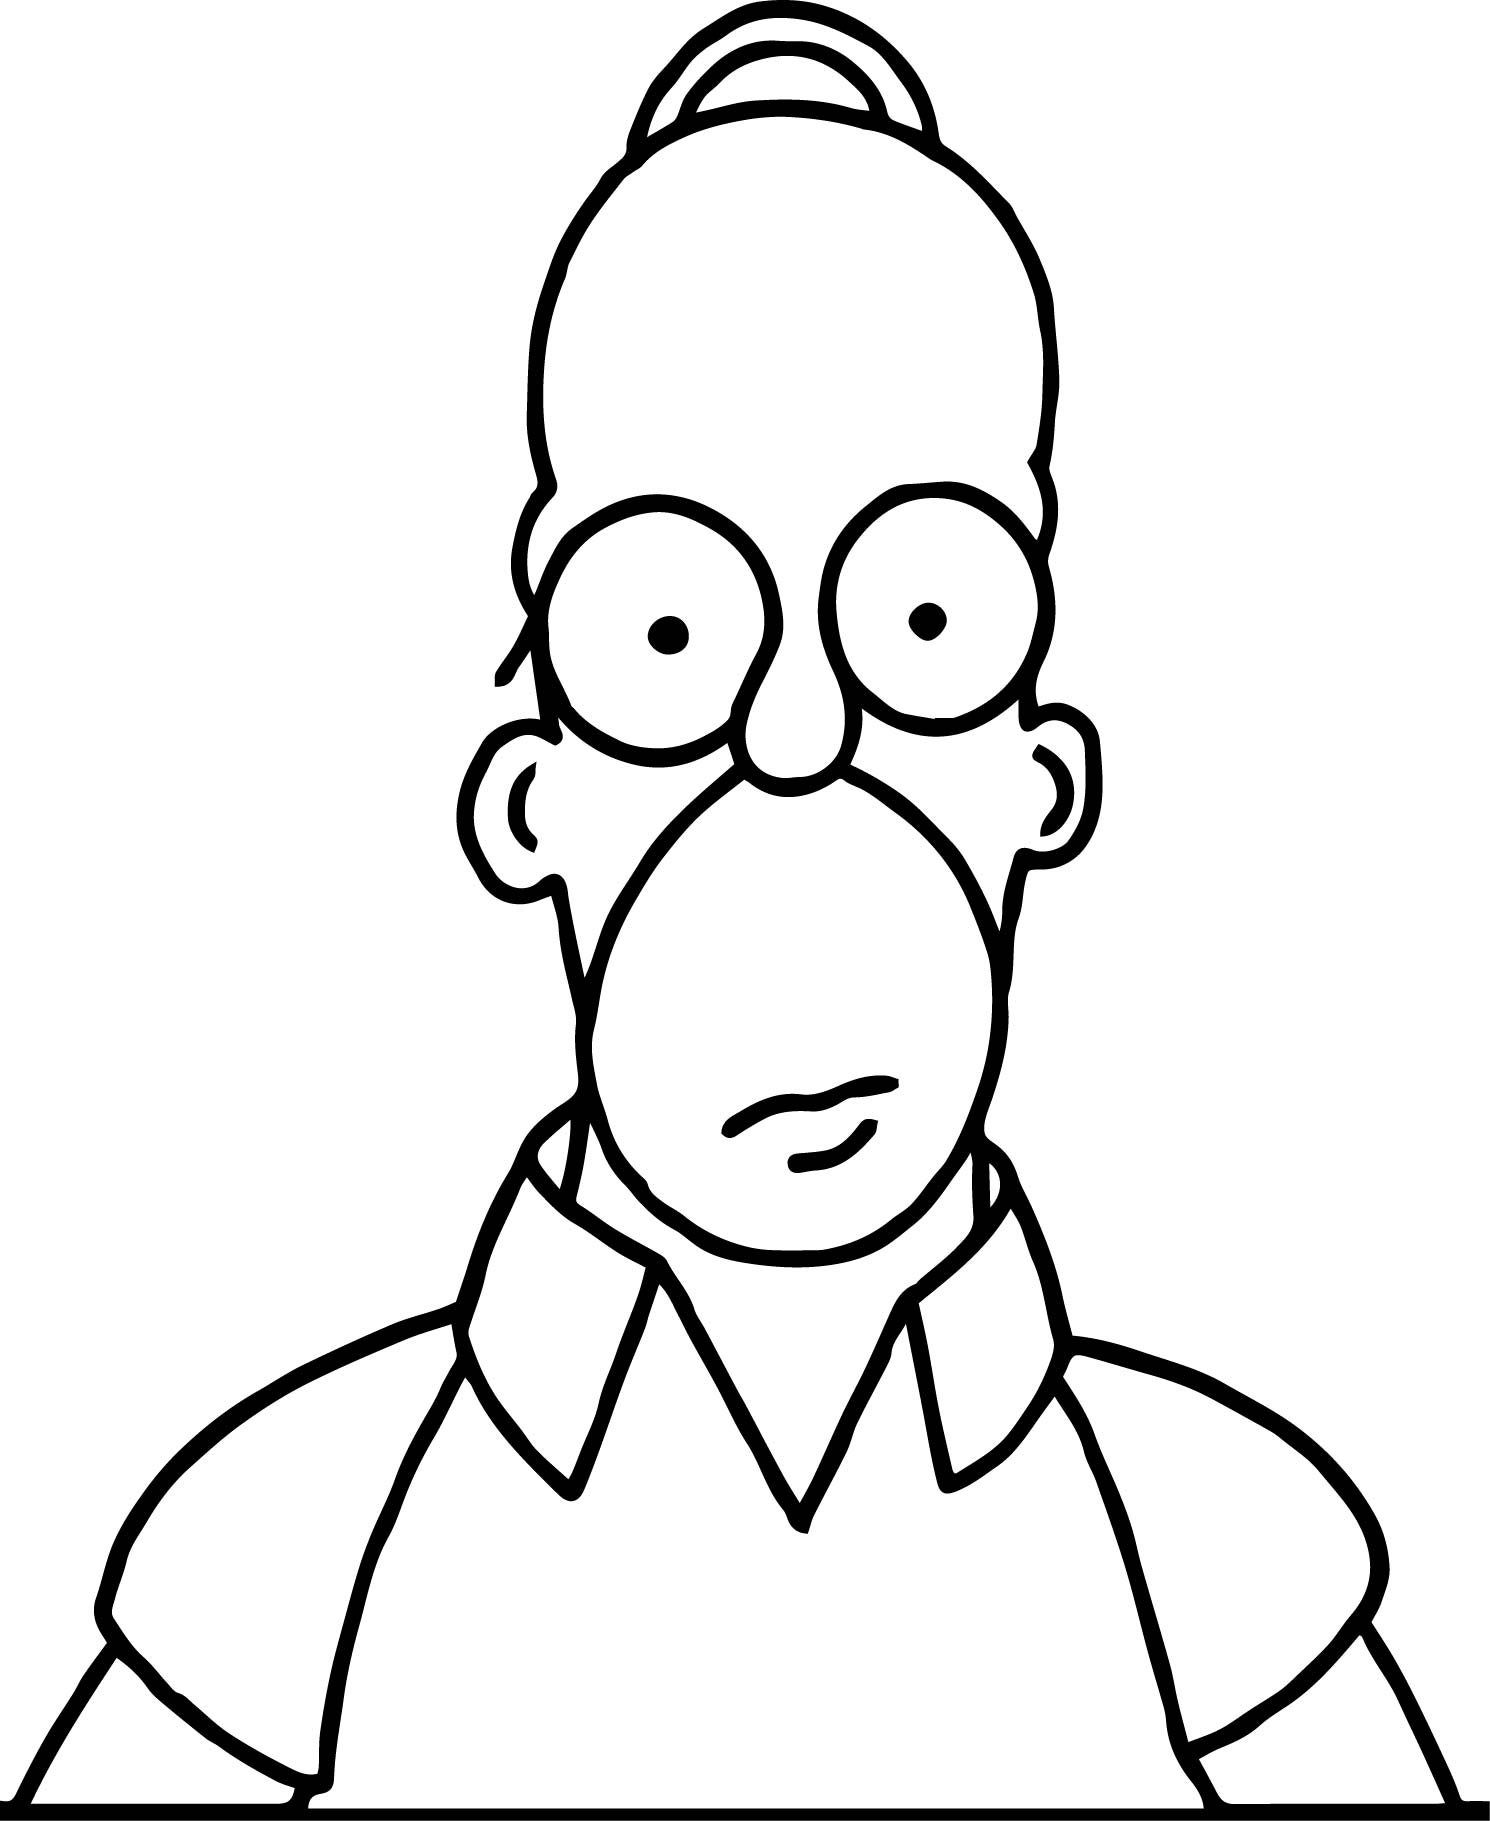 Homer Simpson Coloring Page at GetColorings.com | Free printable ...